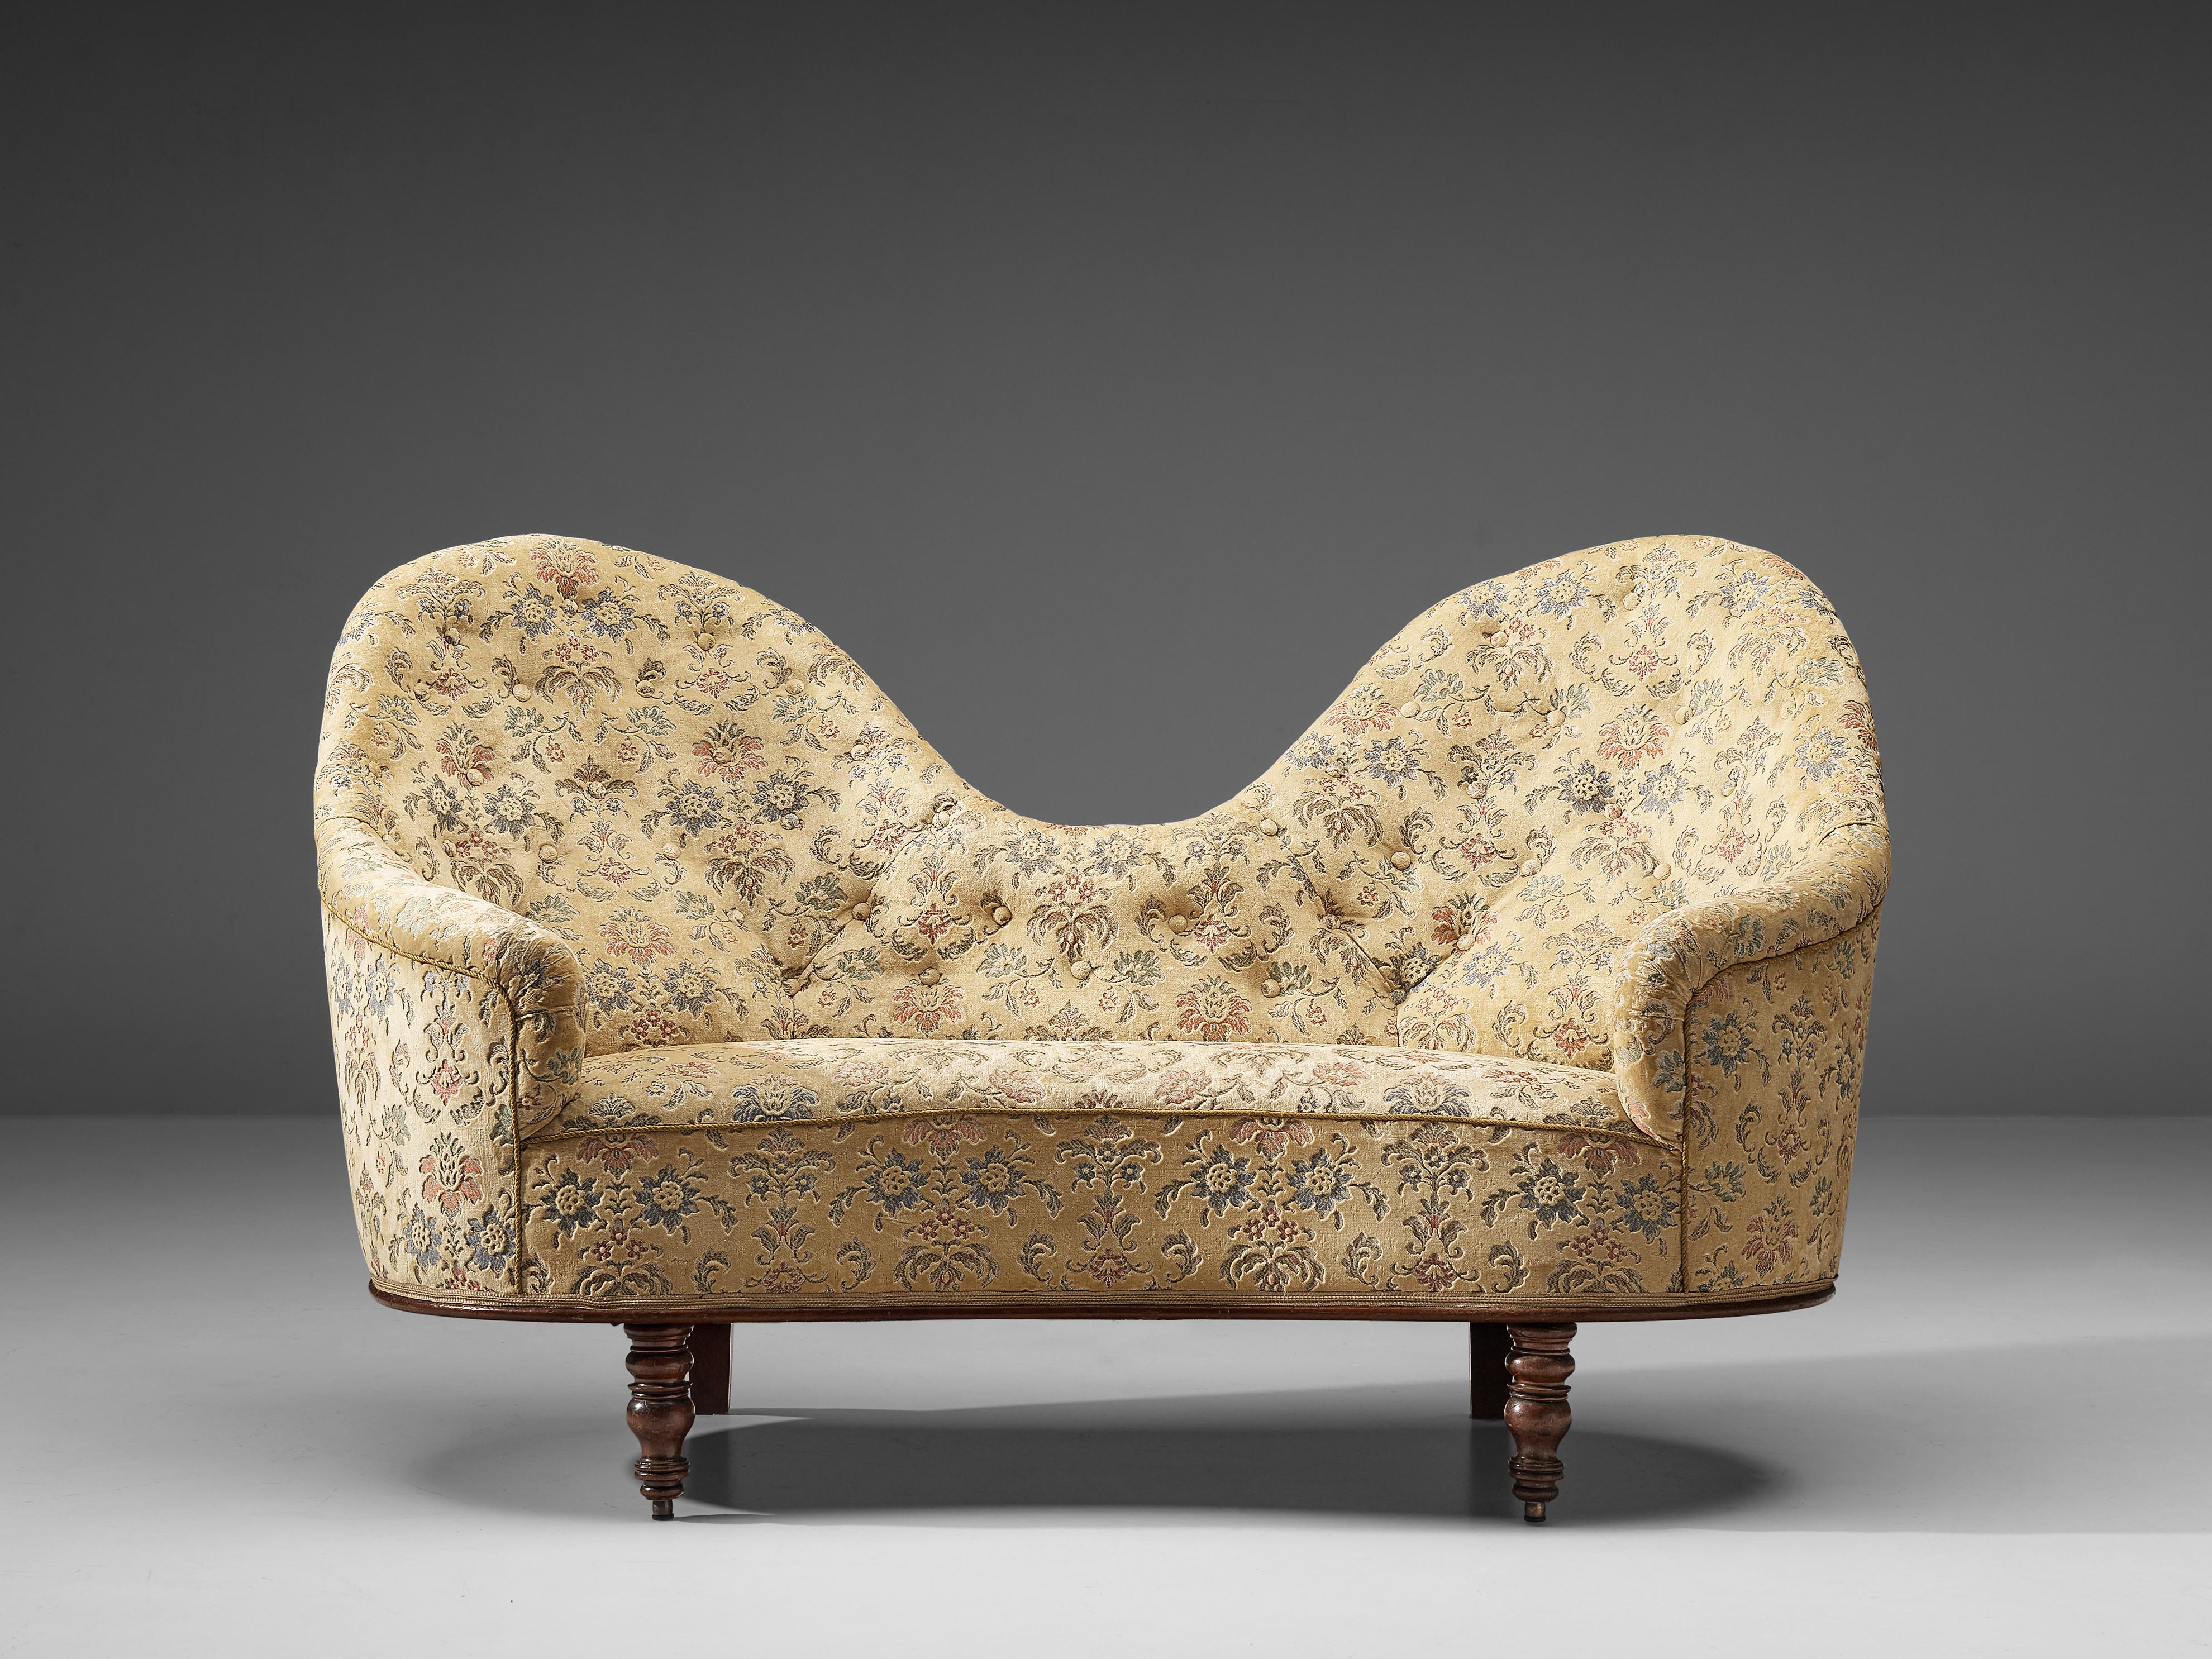 Art Deco sofa, wood, fabric, France, 1940s

This charming two-seat sofa comes with a delicate upholstery featuring a cream overtone decorated with an illustrative pattern of fauna and flora, stitched in a classic way with soft colors. Truly